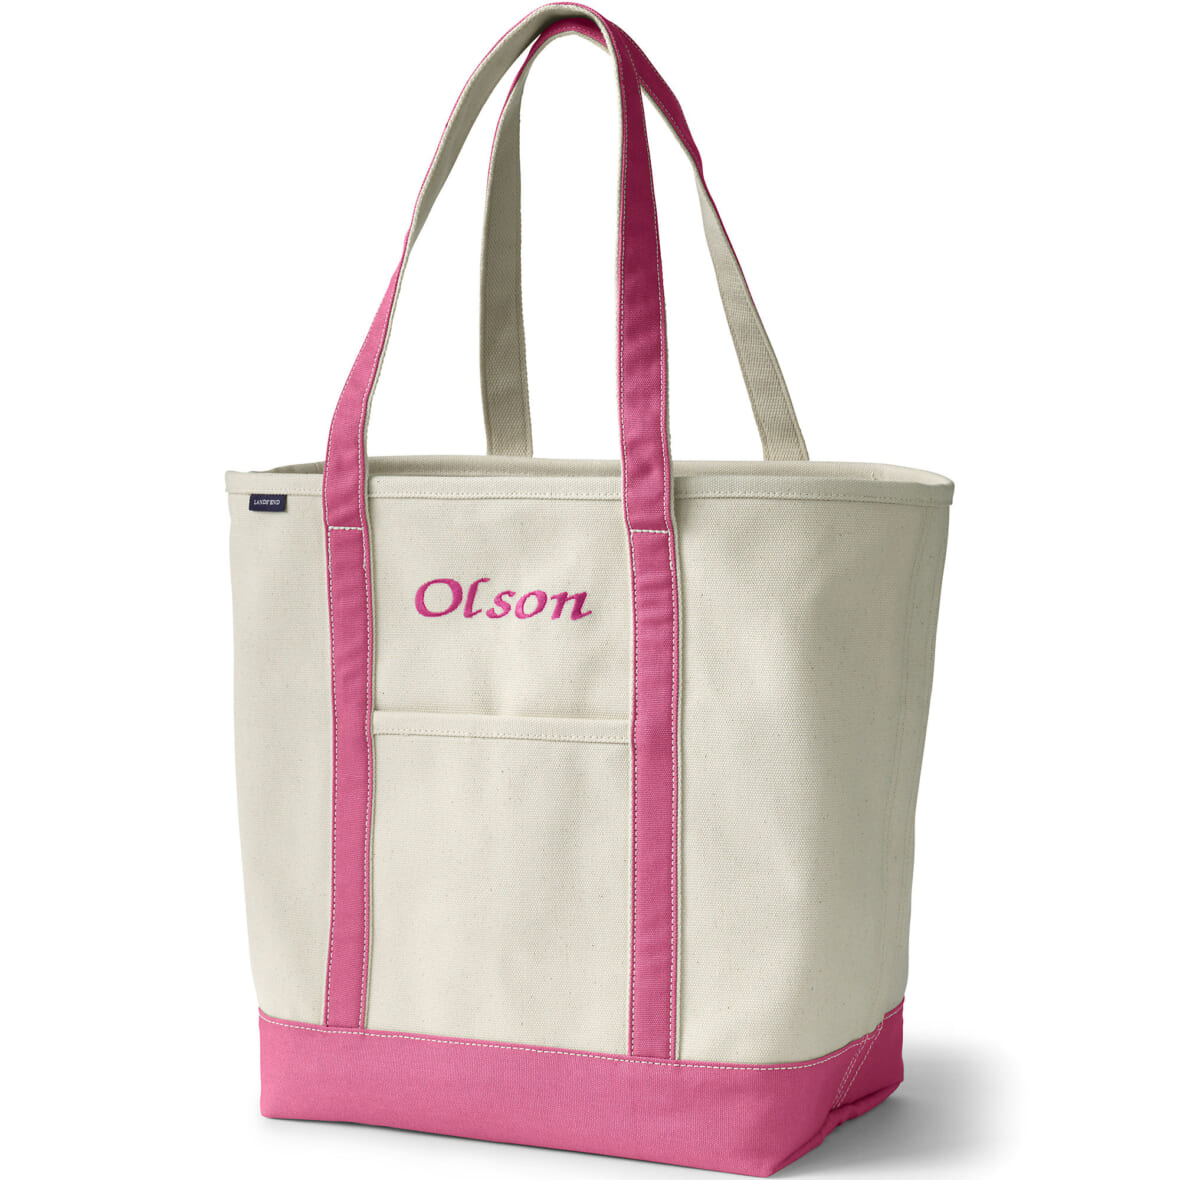 Best Valentine's Day Gifts for Her: Tote Bag